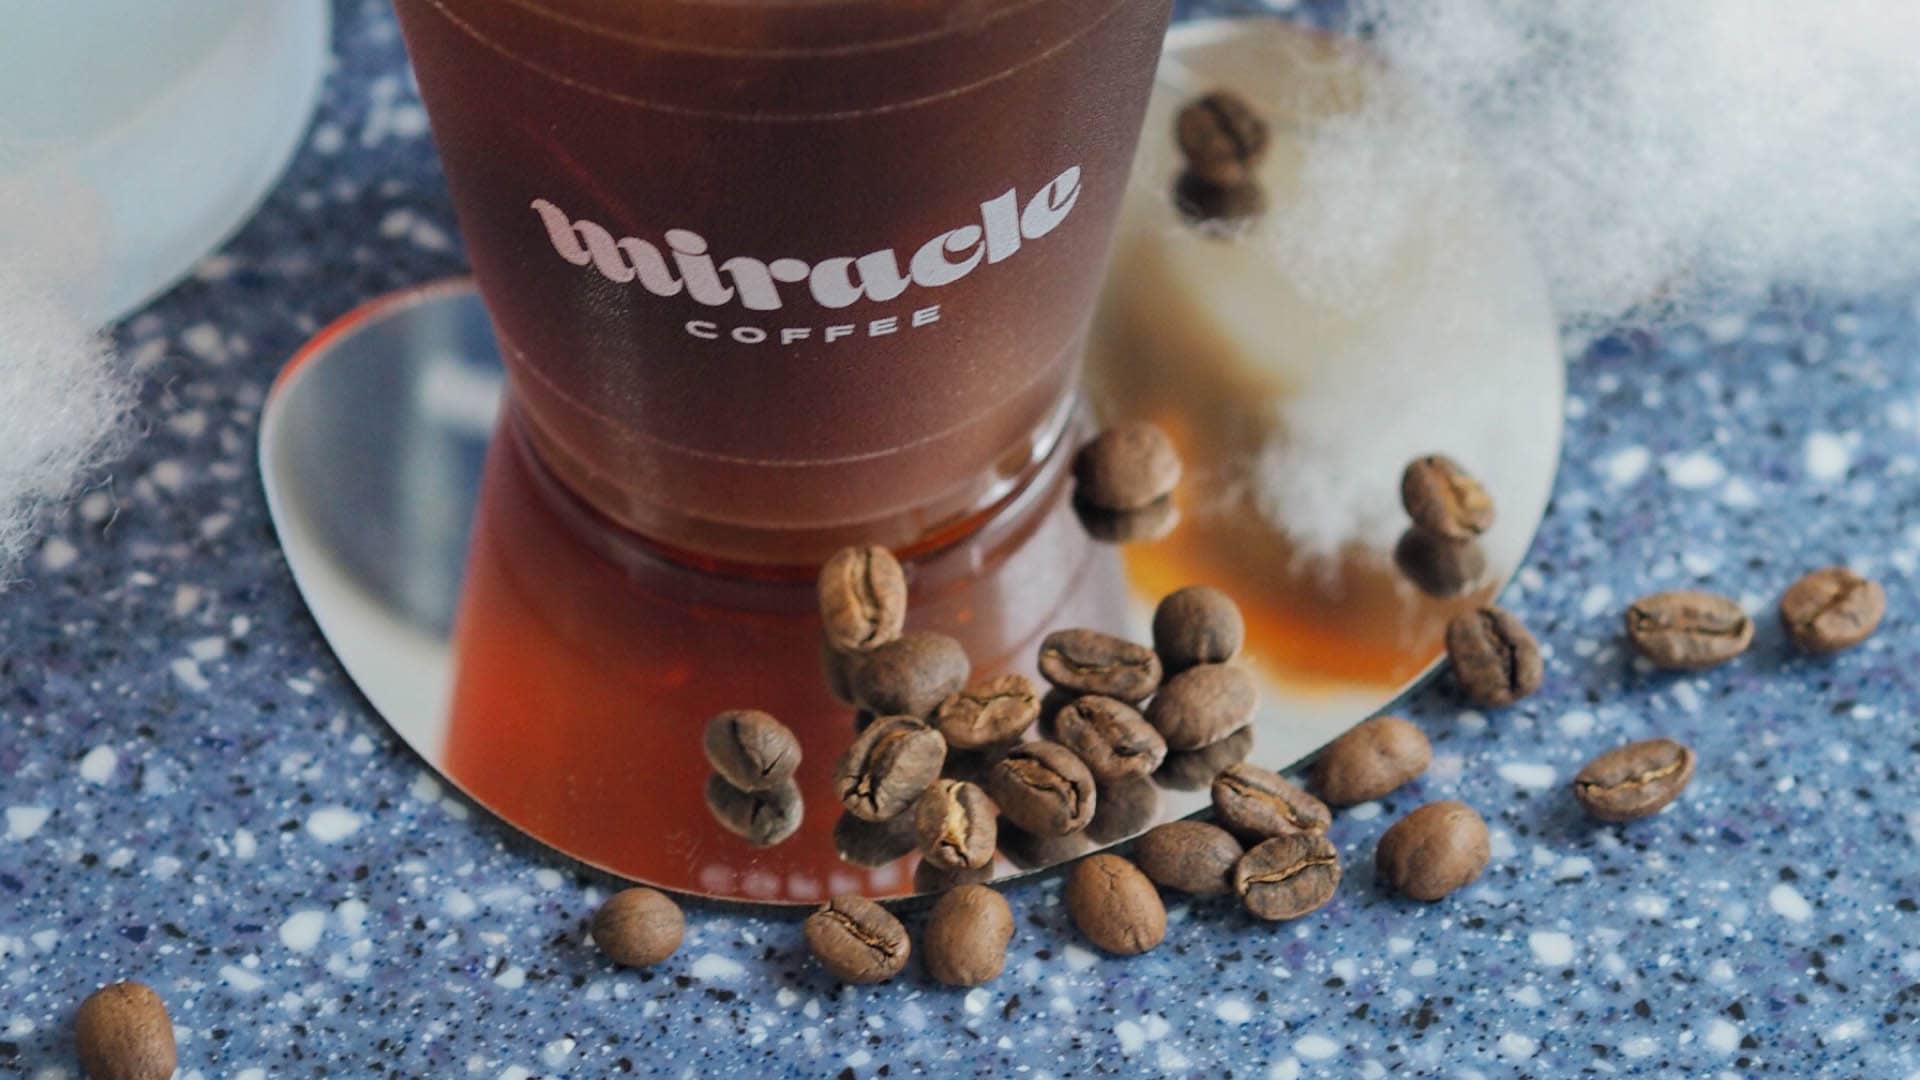 Sip on artisanal coffee expertly prepared with Miracle Coffee roasted, single origin beans.